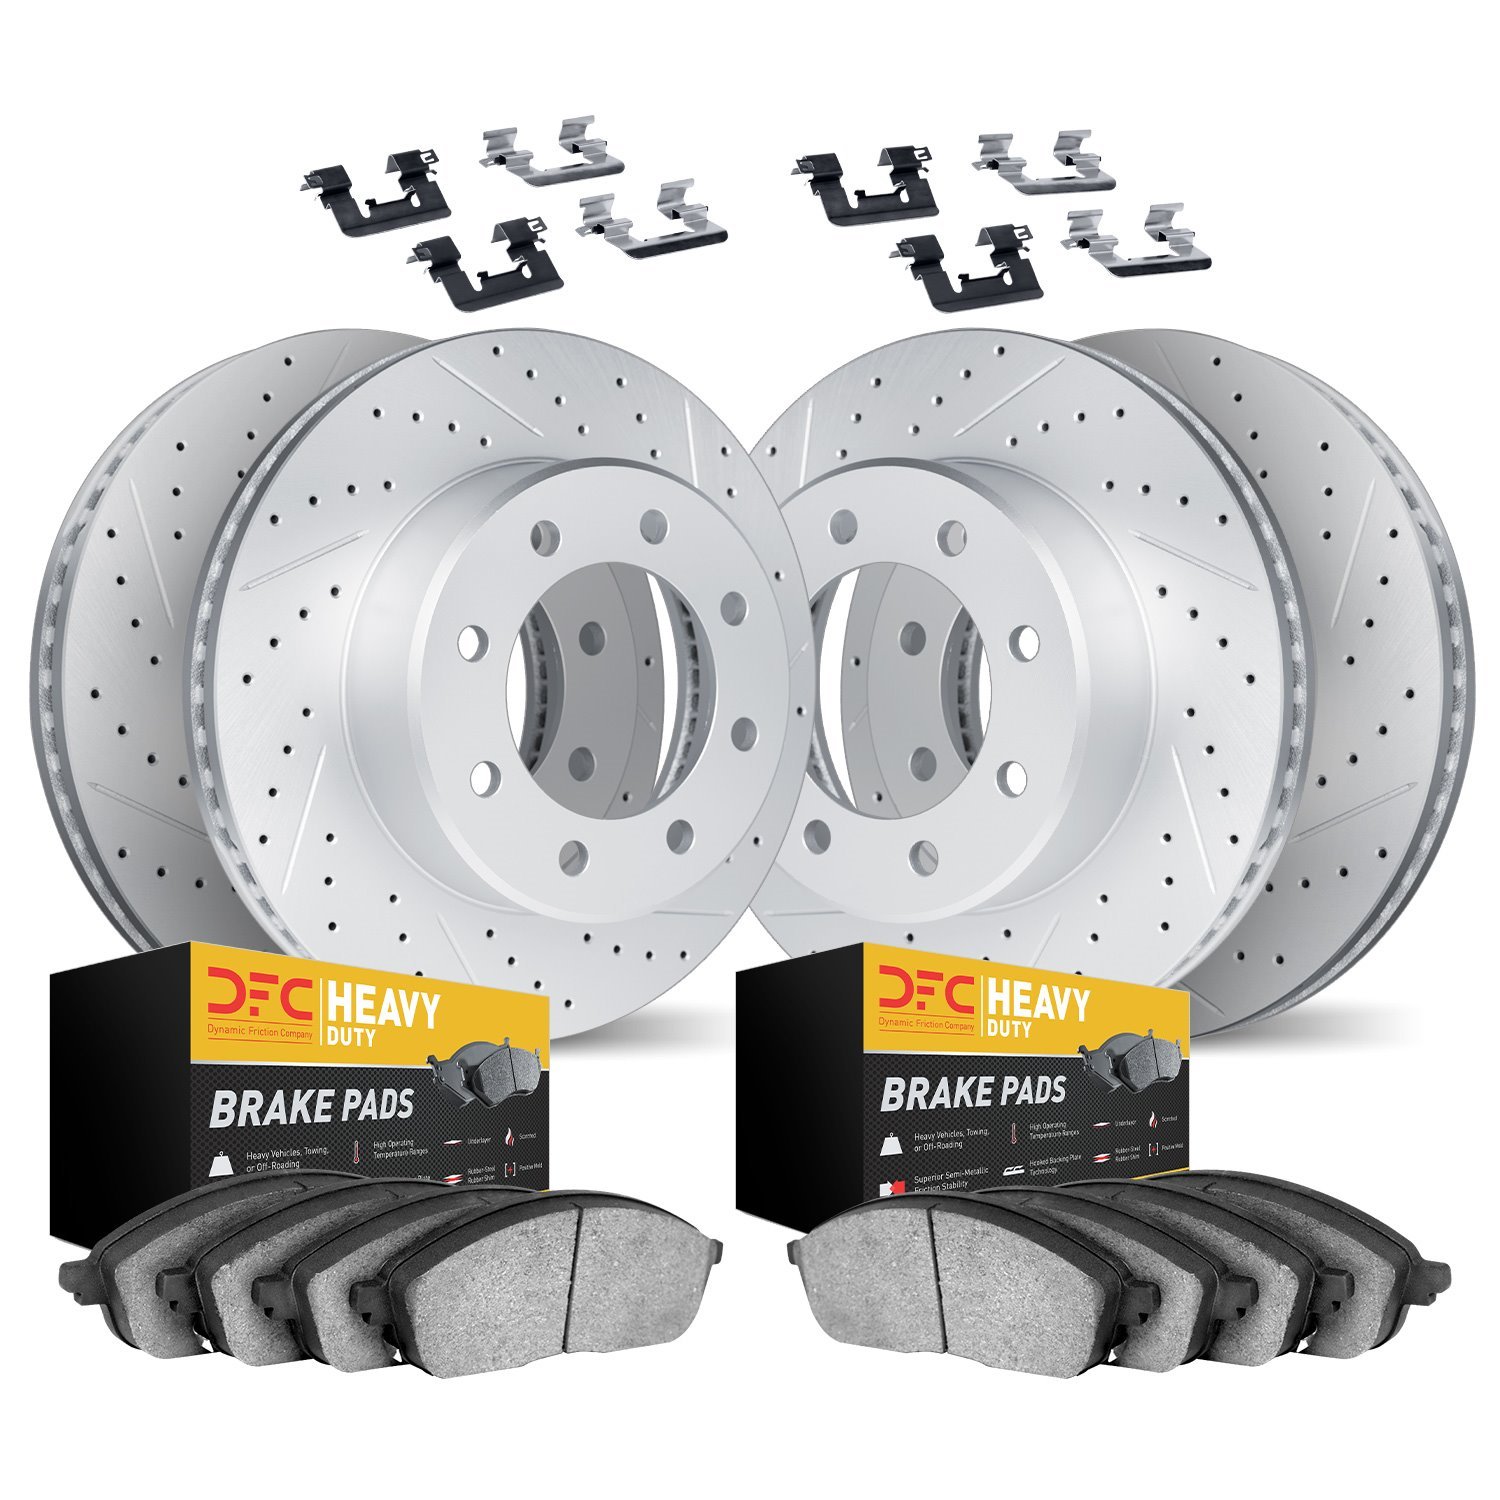 2214-99035 Geoperformance Drilled/Slotted Rotors w/Heavy-Duty Pads Kit & Hardware, 1999-2007 Ford/Lincoln/Mercury/Mazda, Positio